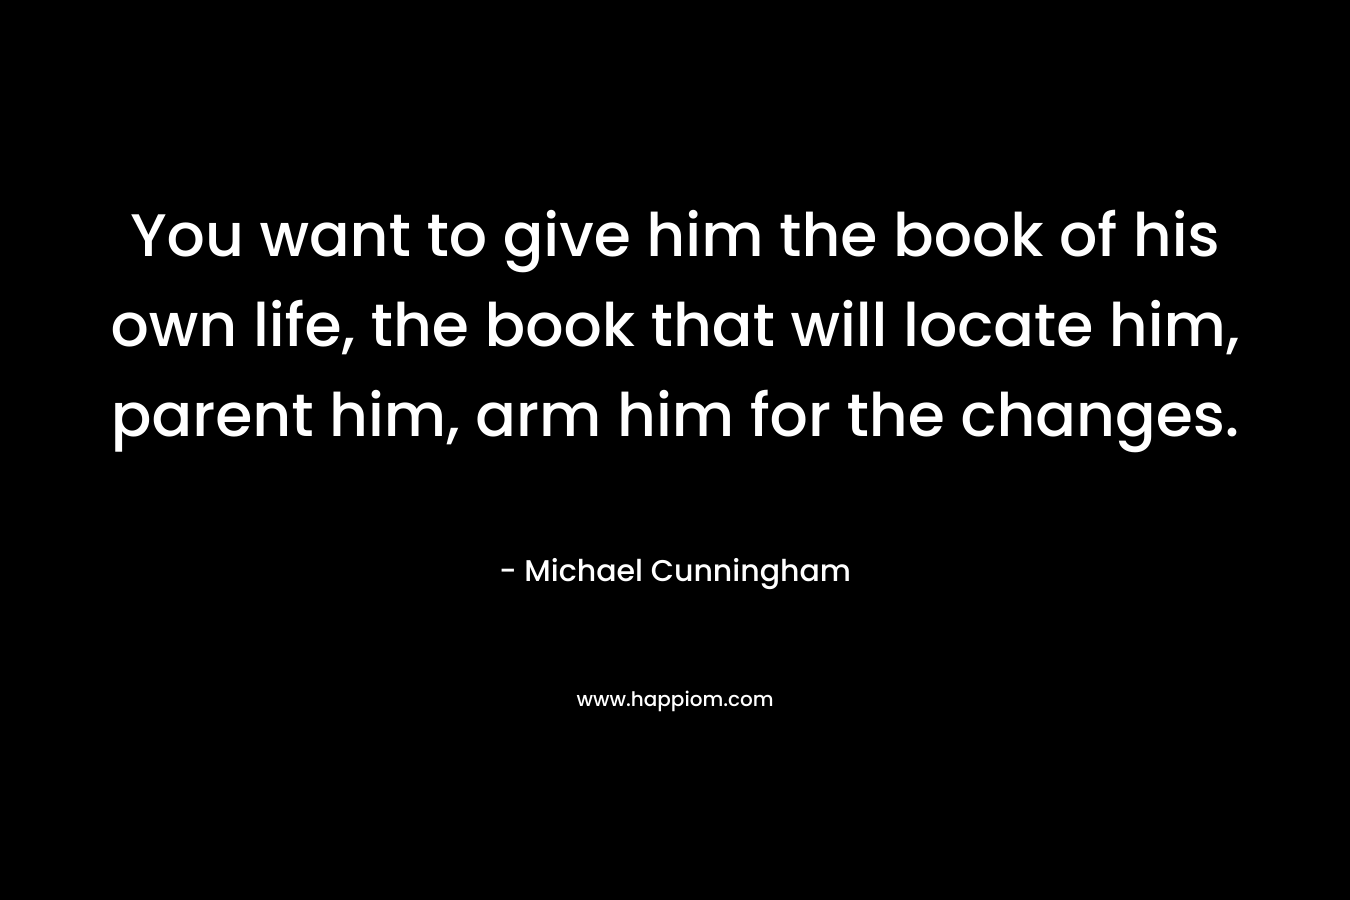 You want to give him the book of his own life, the book that will locate him, parent him, arm him for the changes. – Michael Cunningham